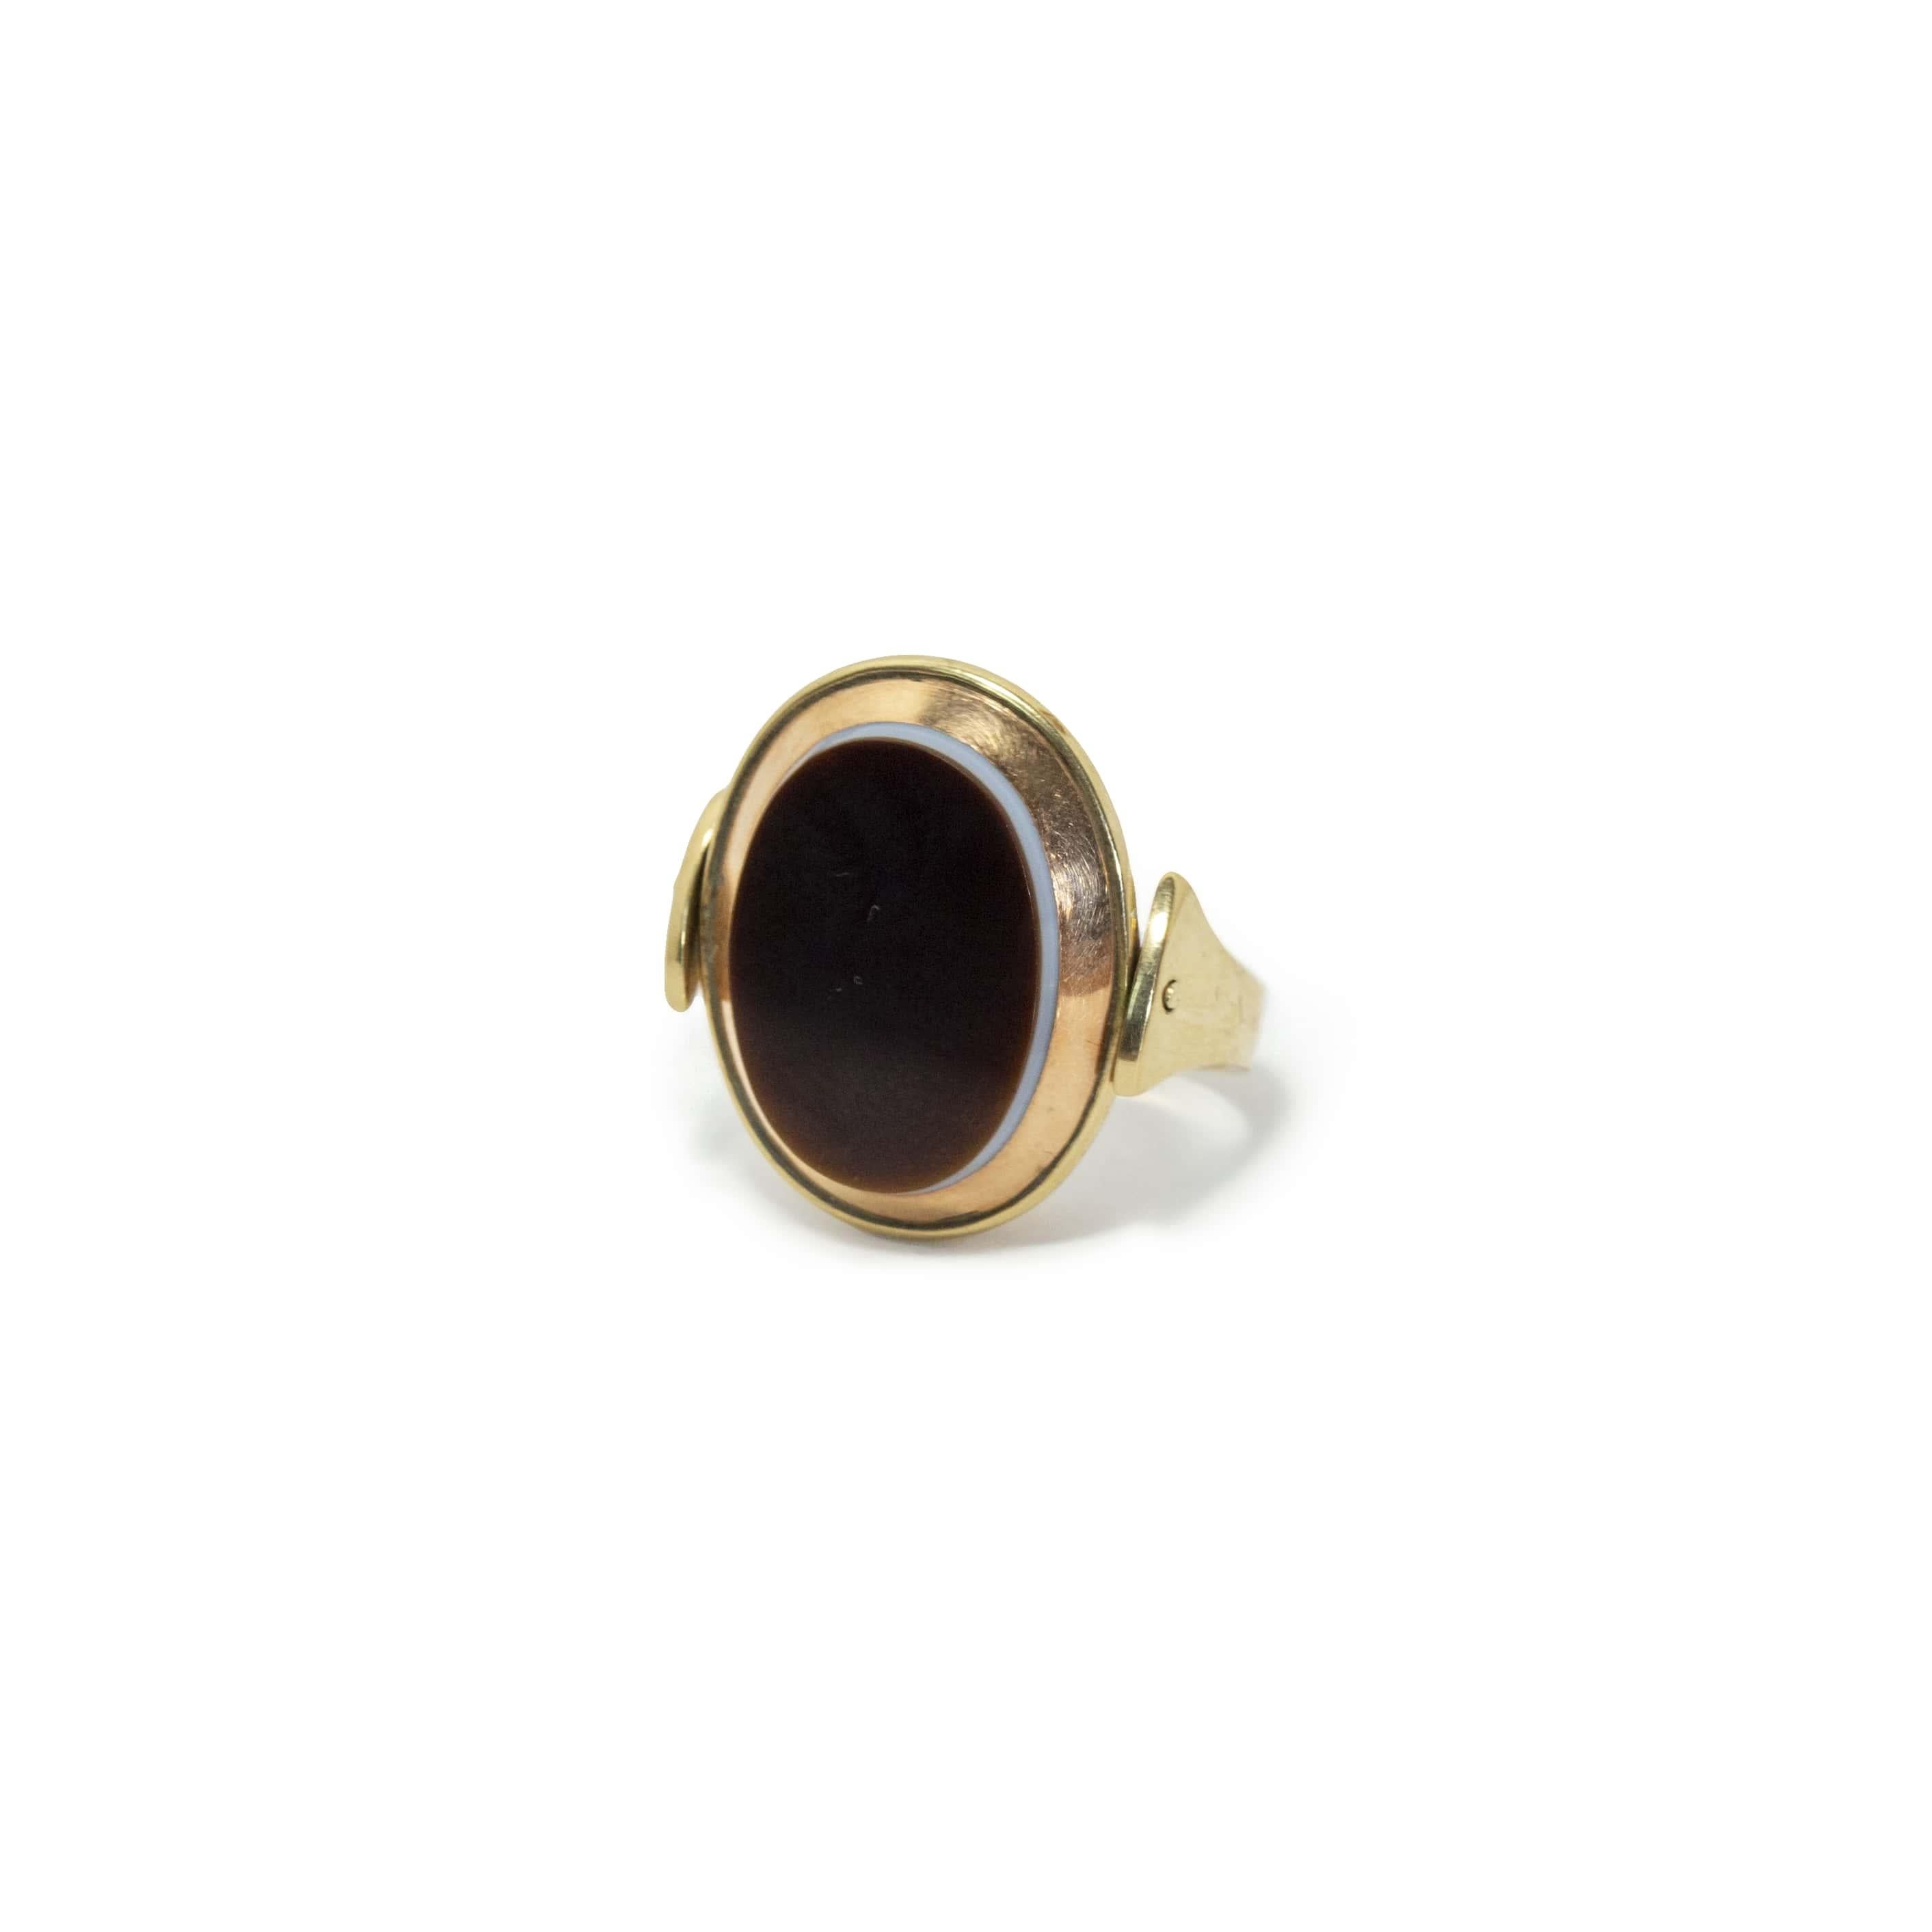 Antique poison locked ring in 10k, solid rose and yellow gold. It’s Swivel (Movable), both sides. Agate stone in white on one side, the other side has black agate.